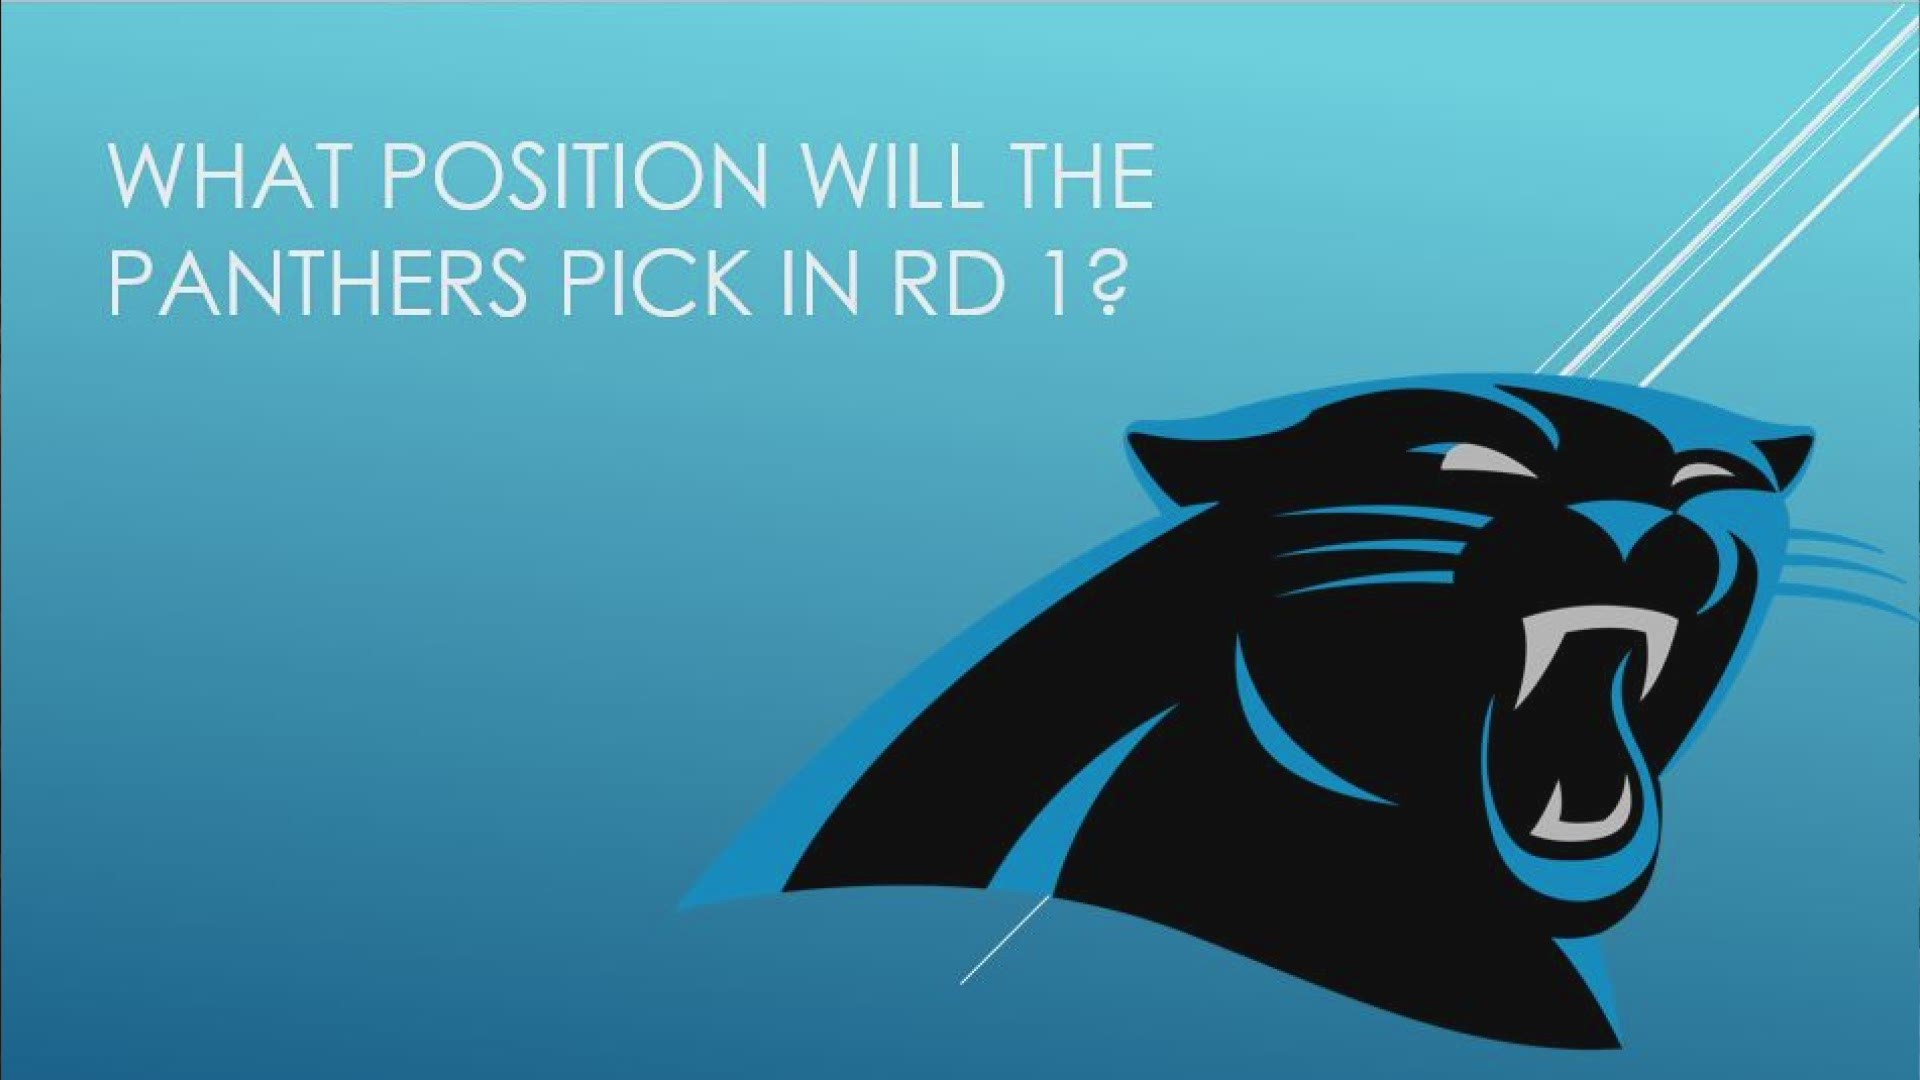 The NFL Draft is finally here! What can fans expect from the Panthers when it comes time to make their selection?